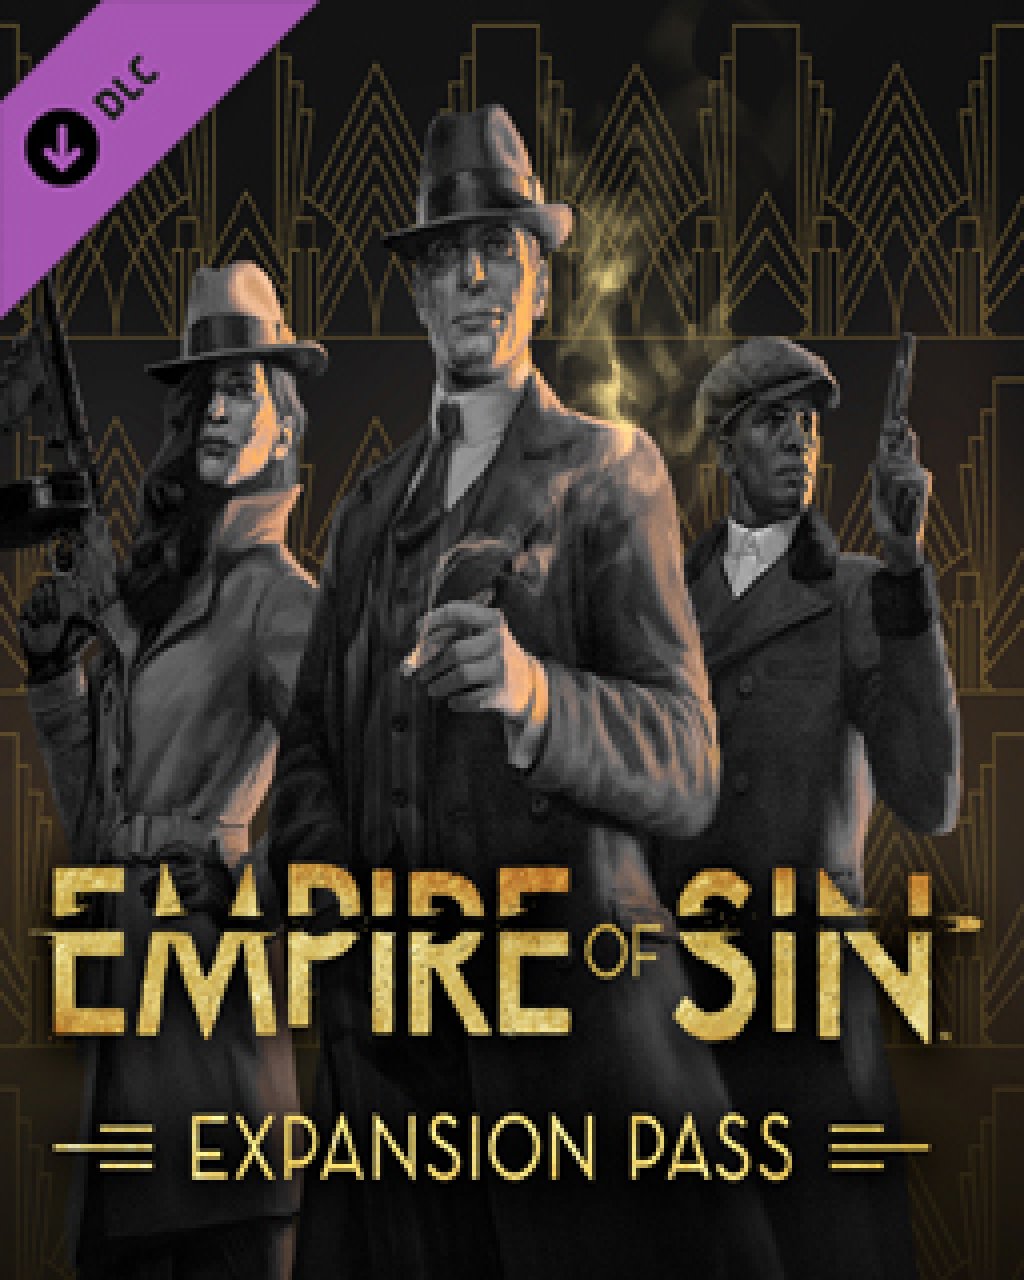 ESD Empire of Sin Expansion Pass